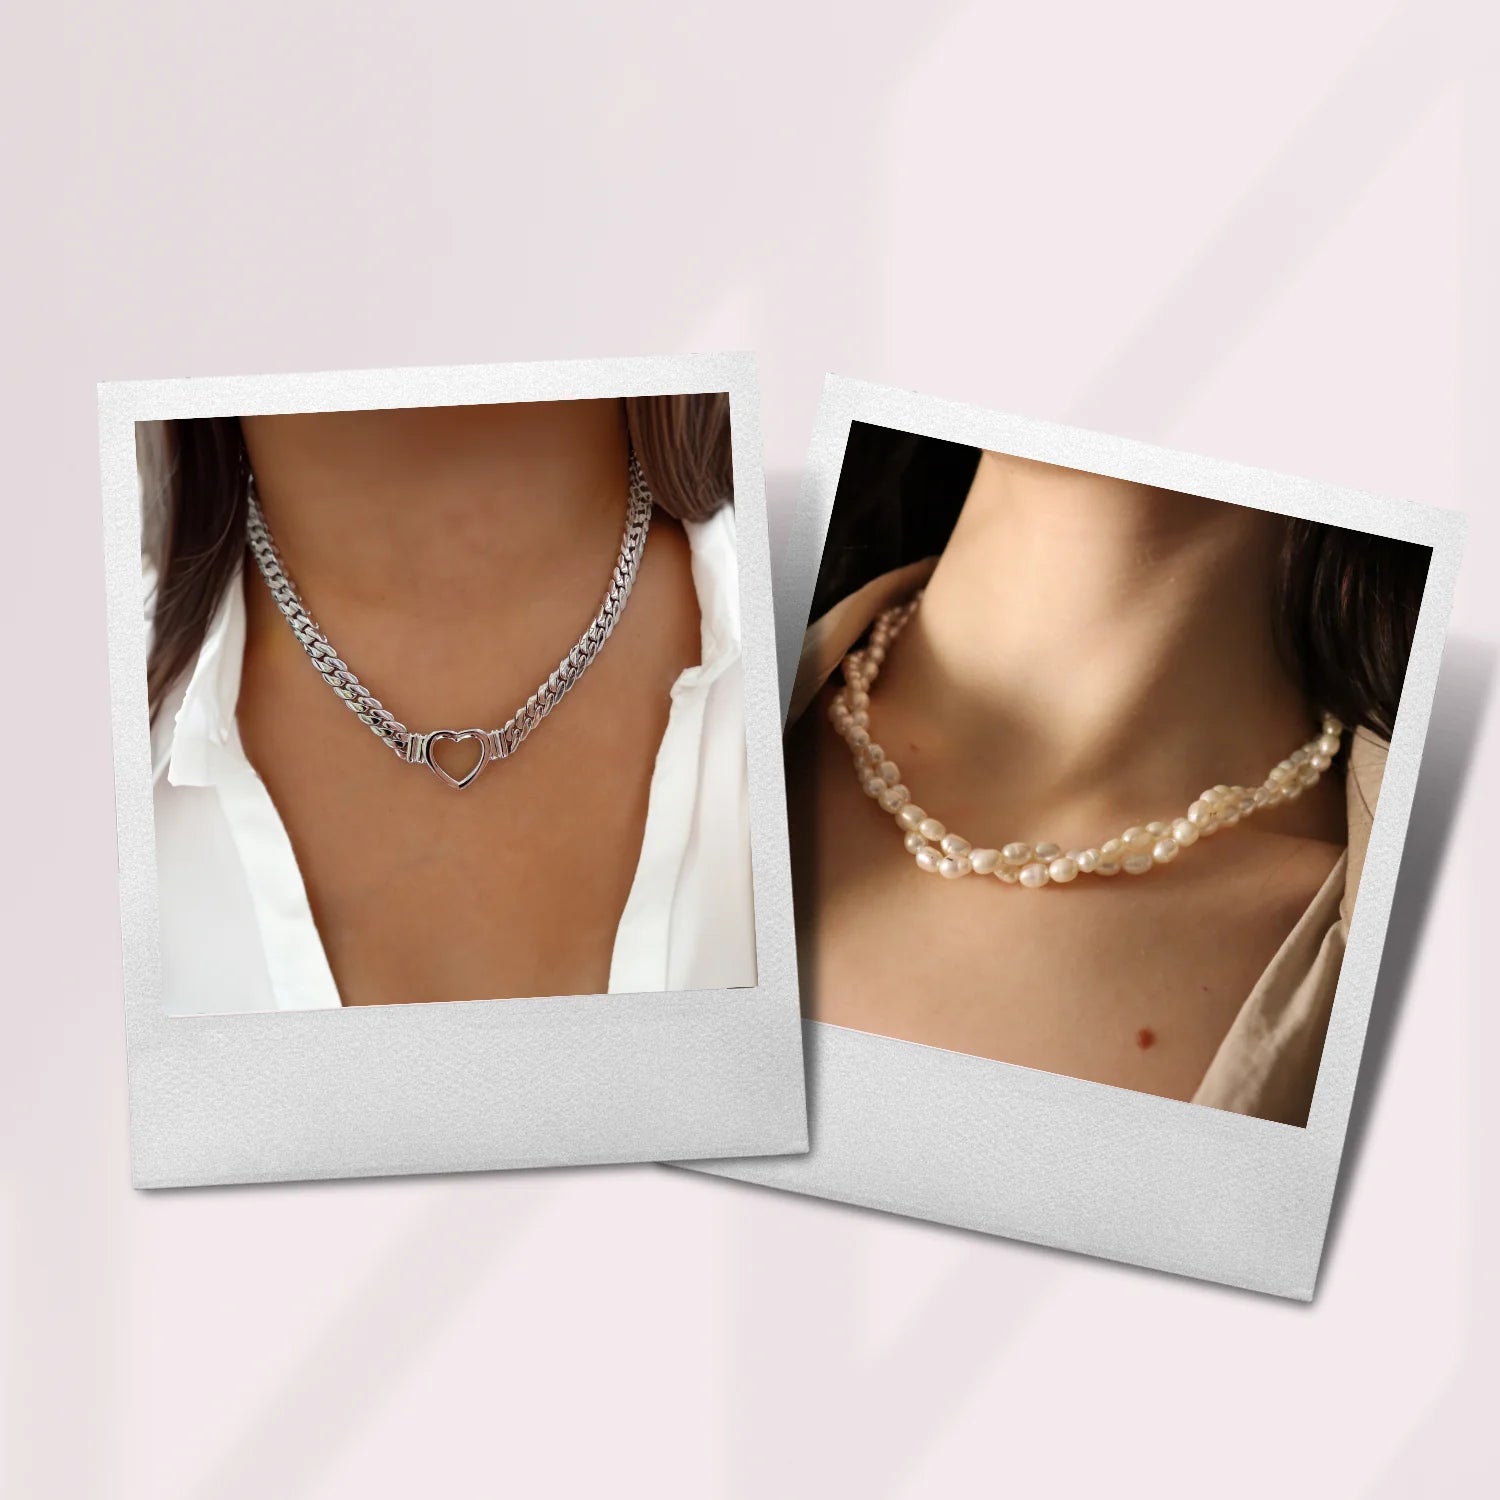 2 pictures of women wearing heart shaped silver necklace and pearl necklace. Represents jewelry pieces under $100.